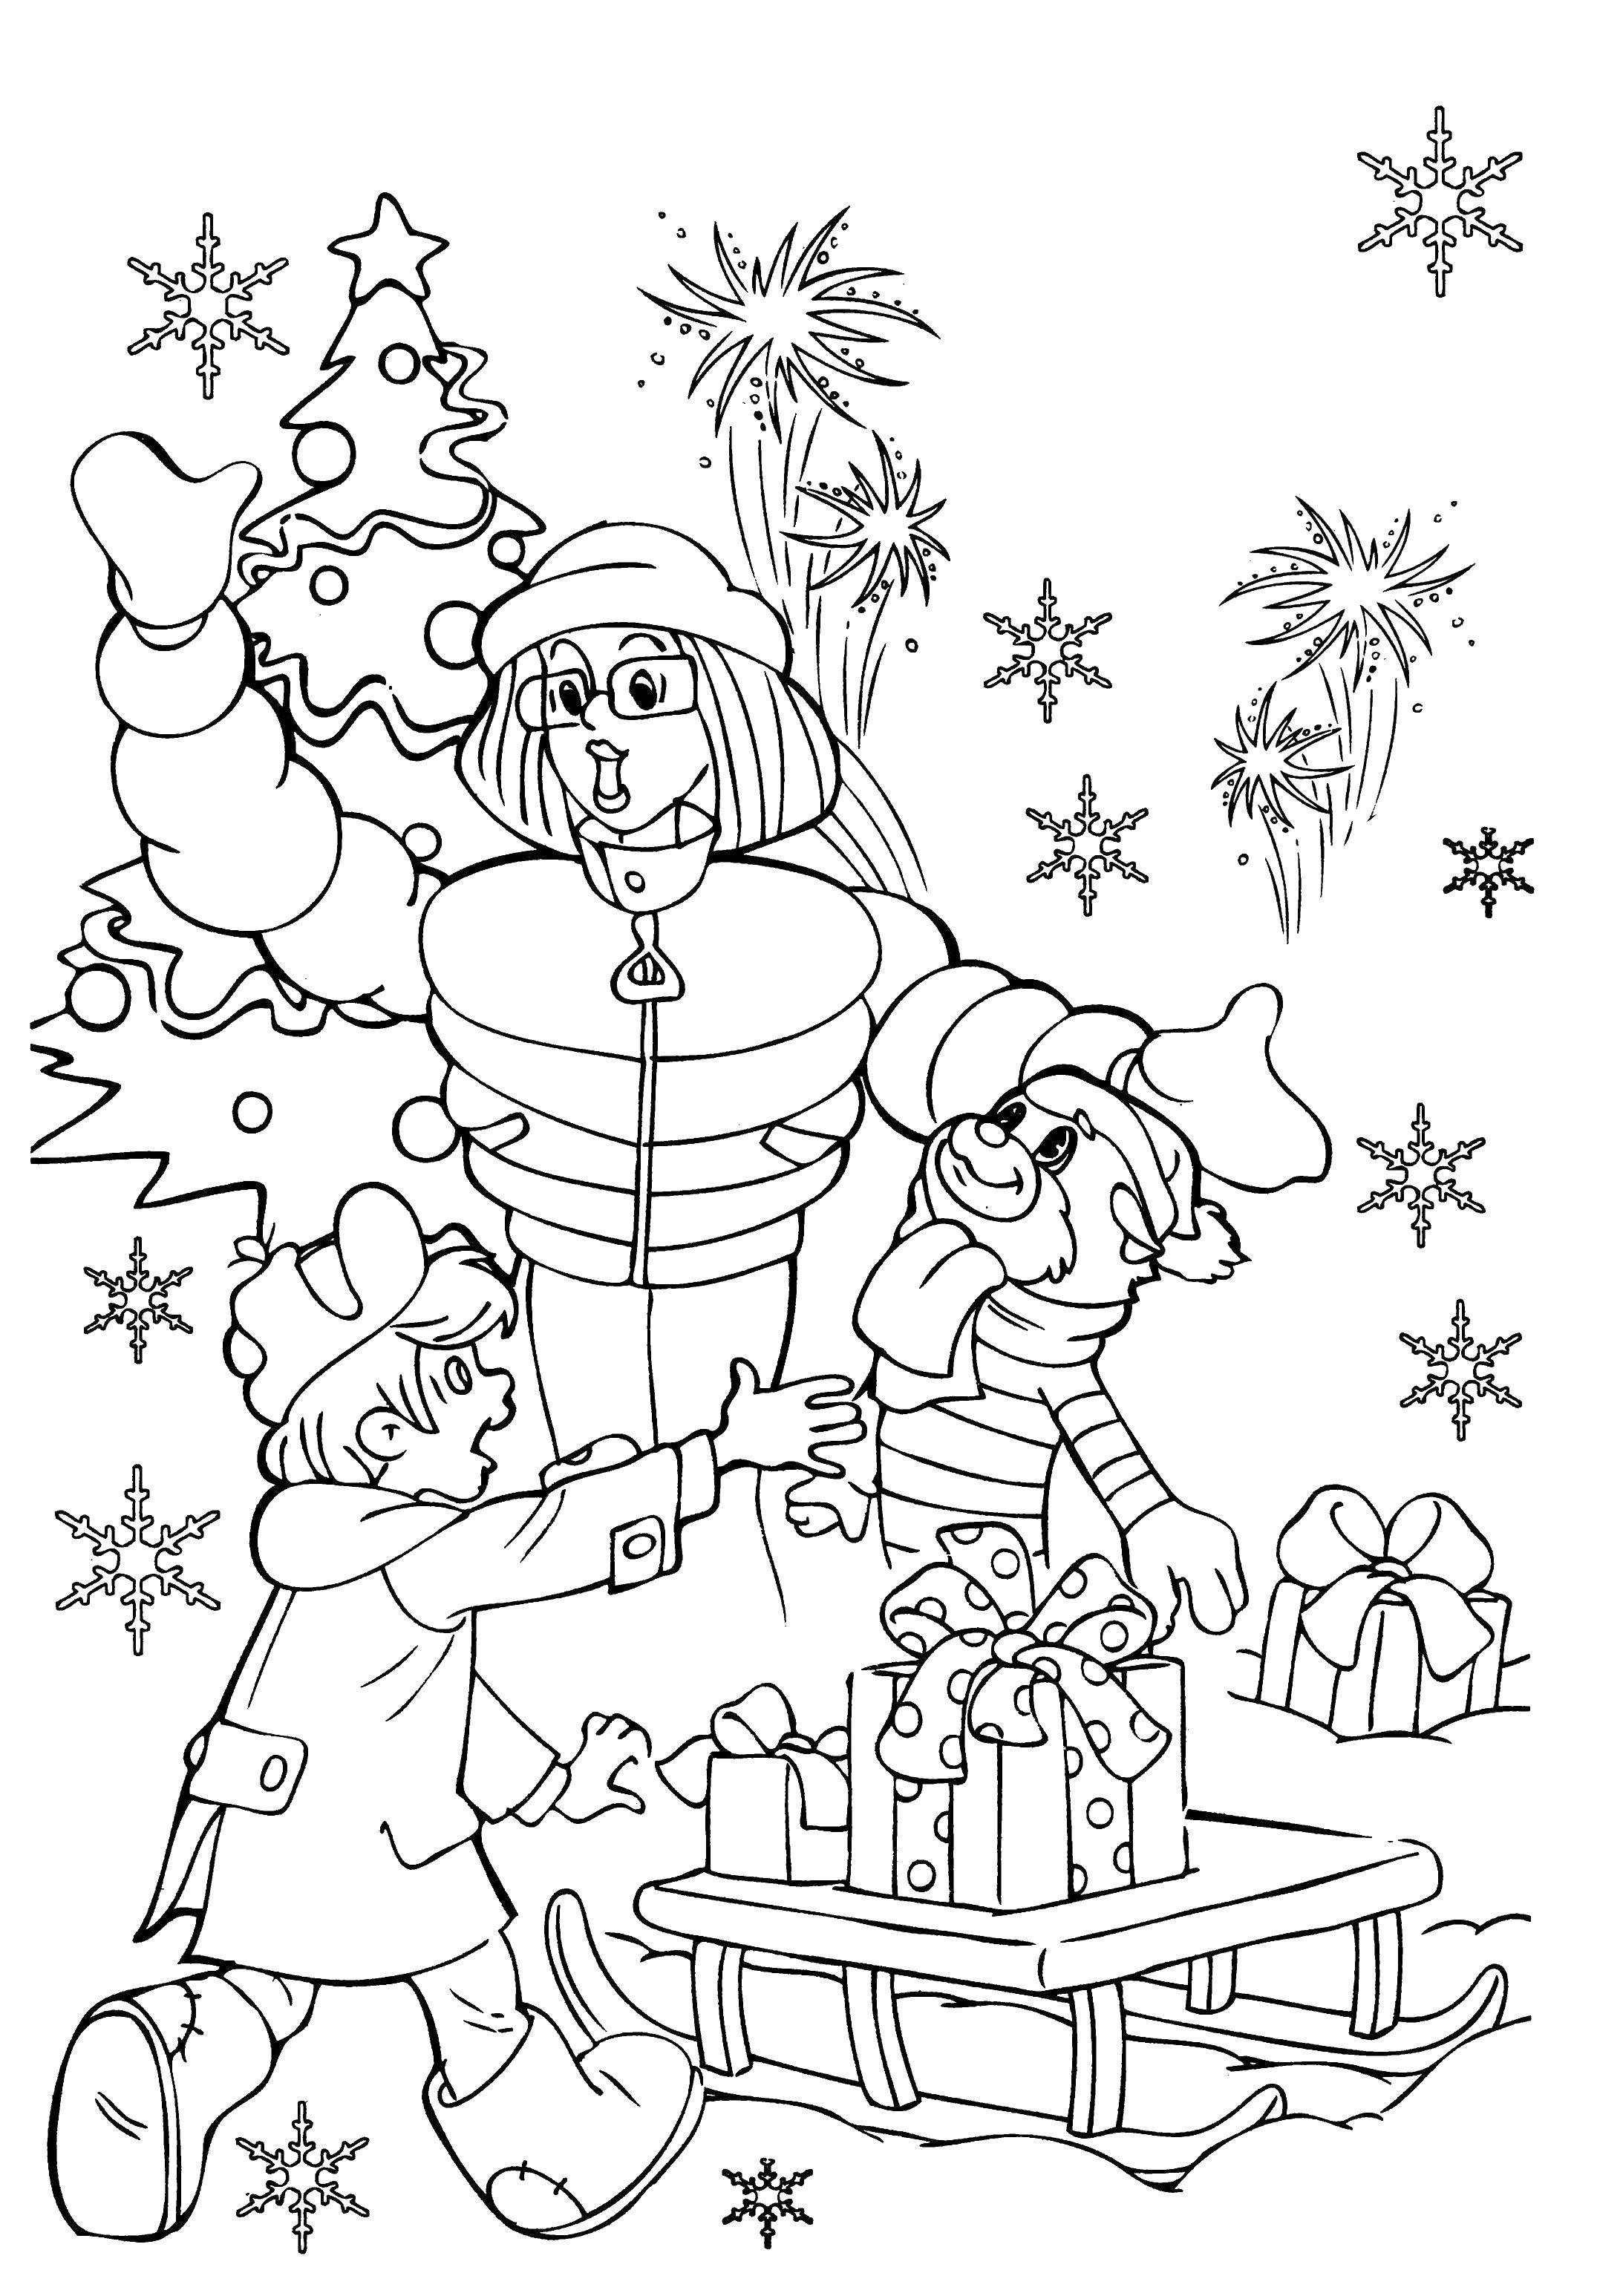 Coloring The cat Matroskin, uncle Fyodor and mom for the new year. Category coloring, buttermilk. Tags:  the cat Matroskin, dog Sharik, Uncle Theodore, mother.